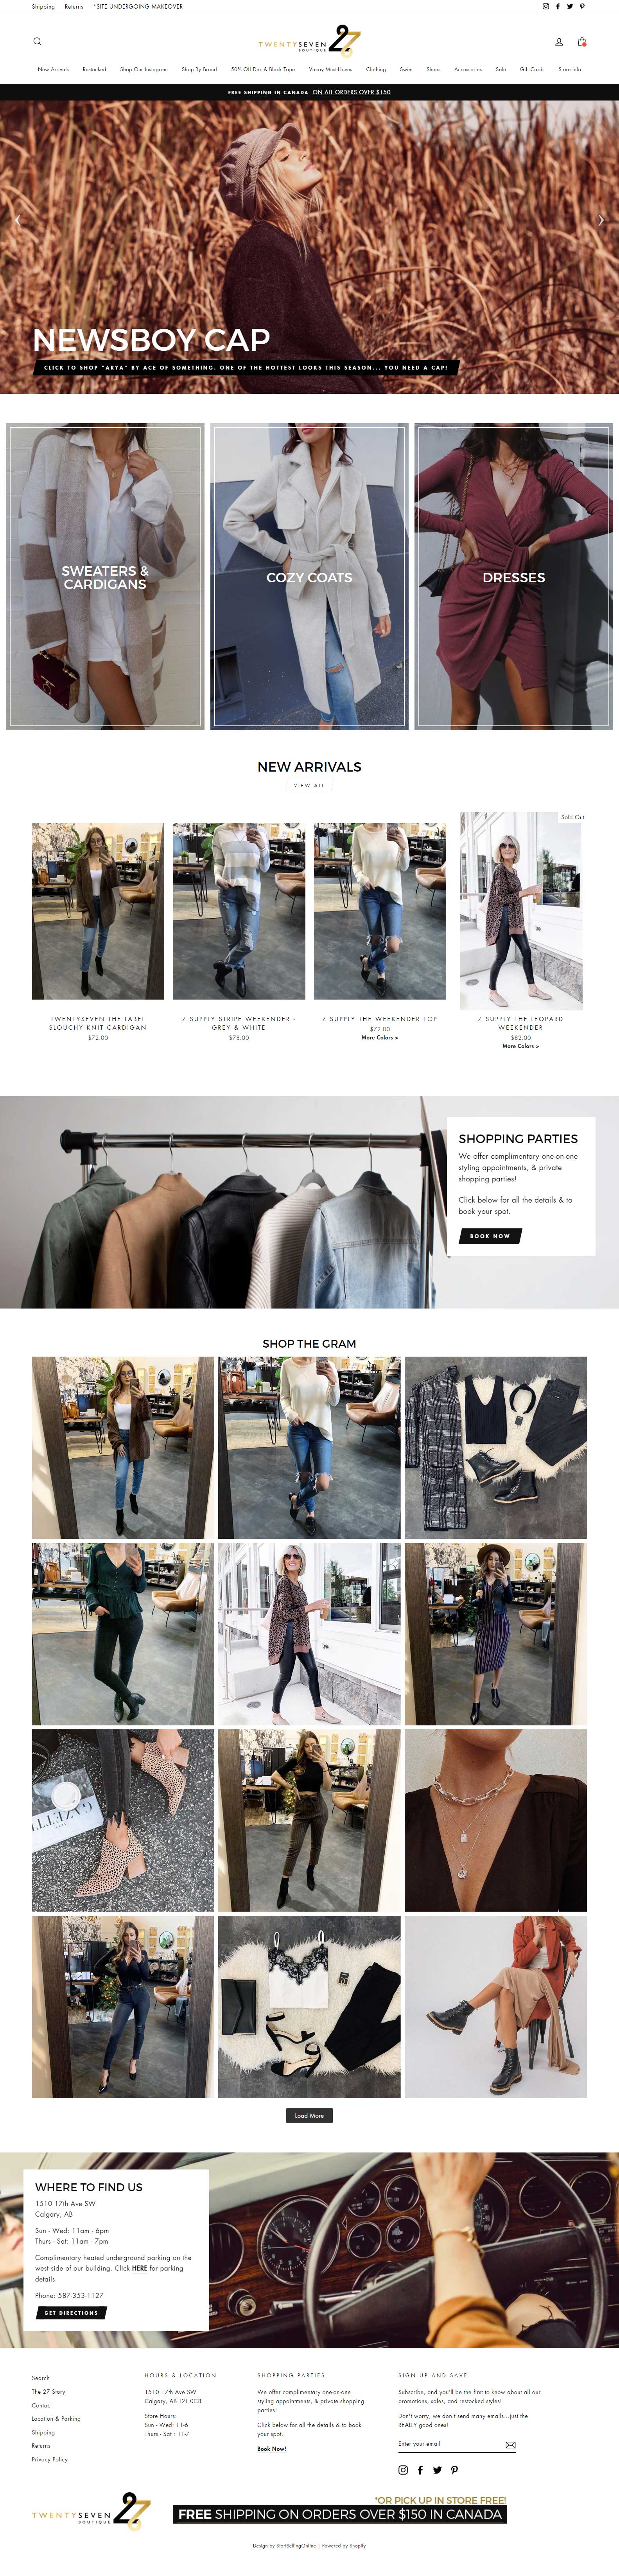 27boutique redesign shopify